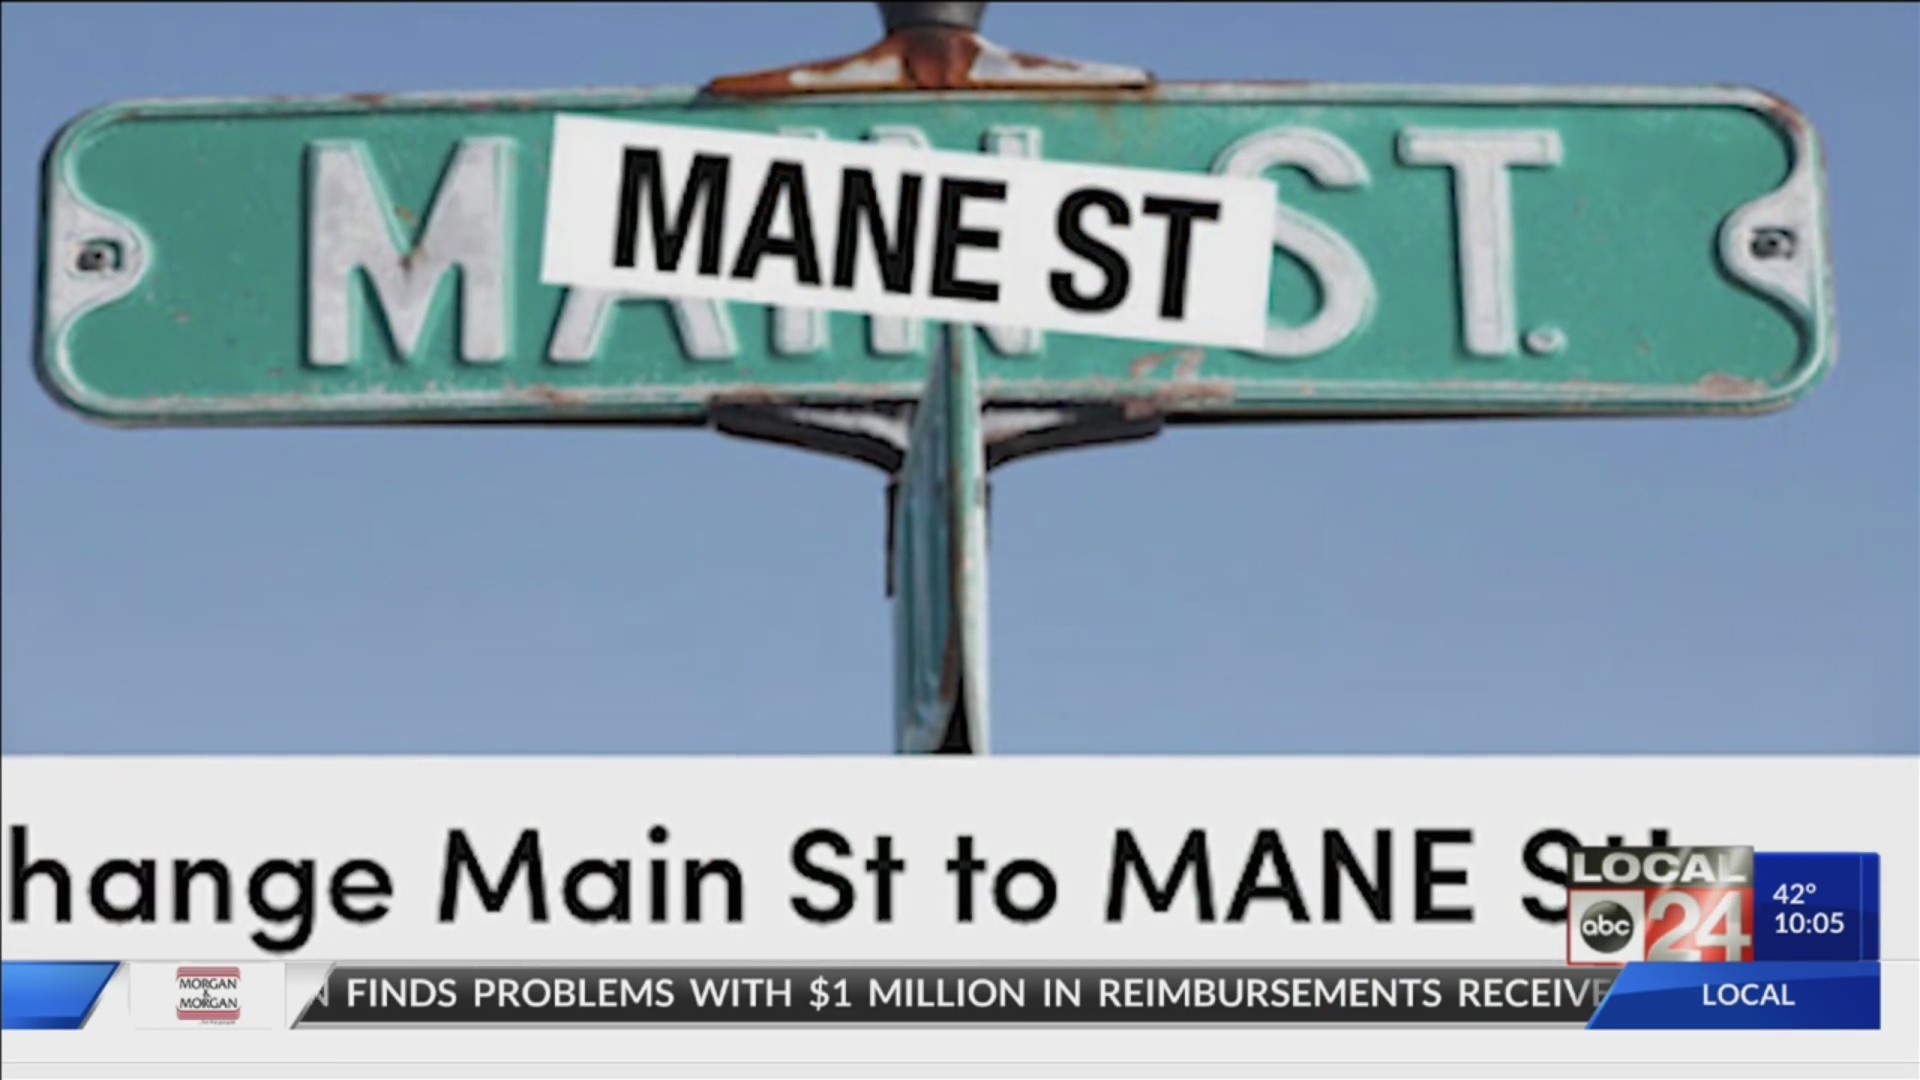 Road name changes Forrest to Forest and Main to Mane